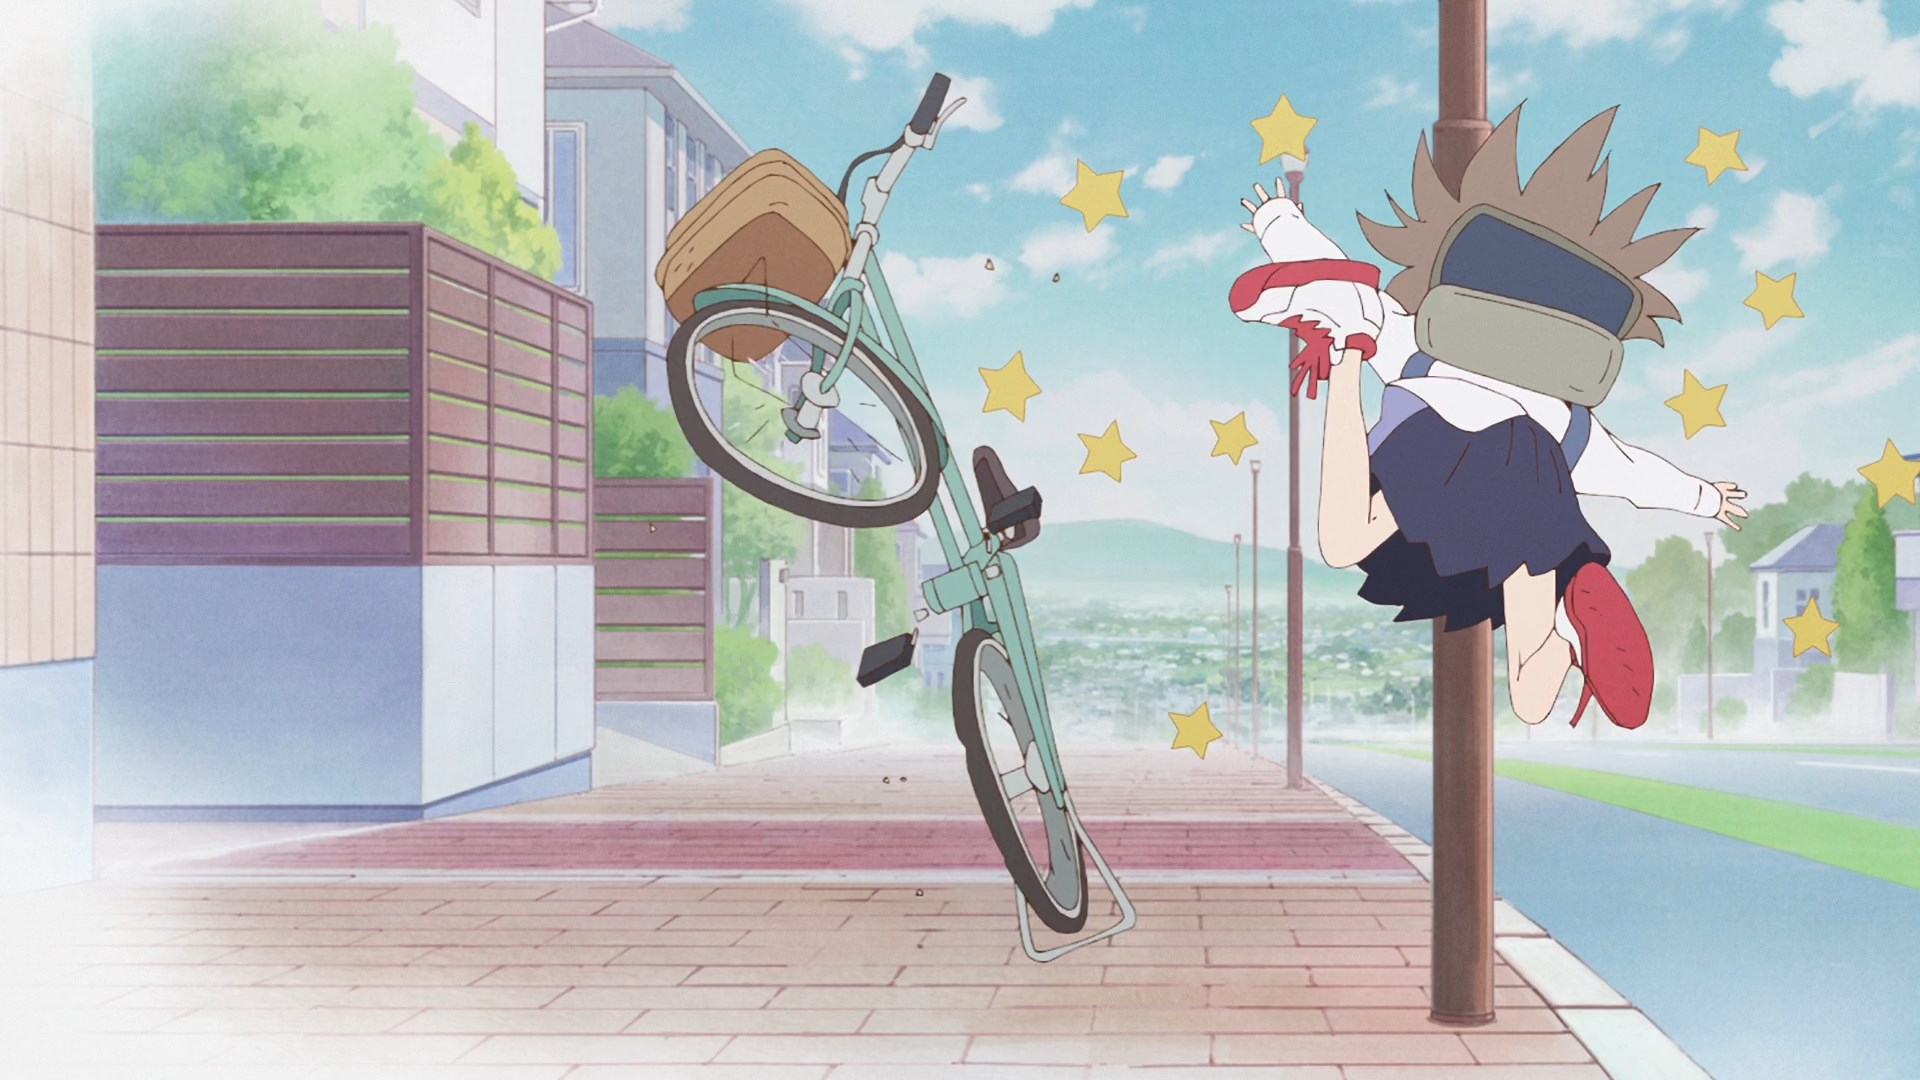 Slightly spacey Yua Serufu face plants right into a lamp post as her bike flies away after spending a bit too much time day dreaming.